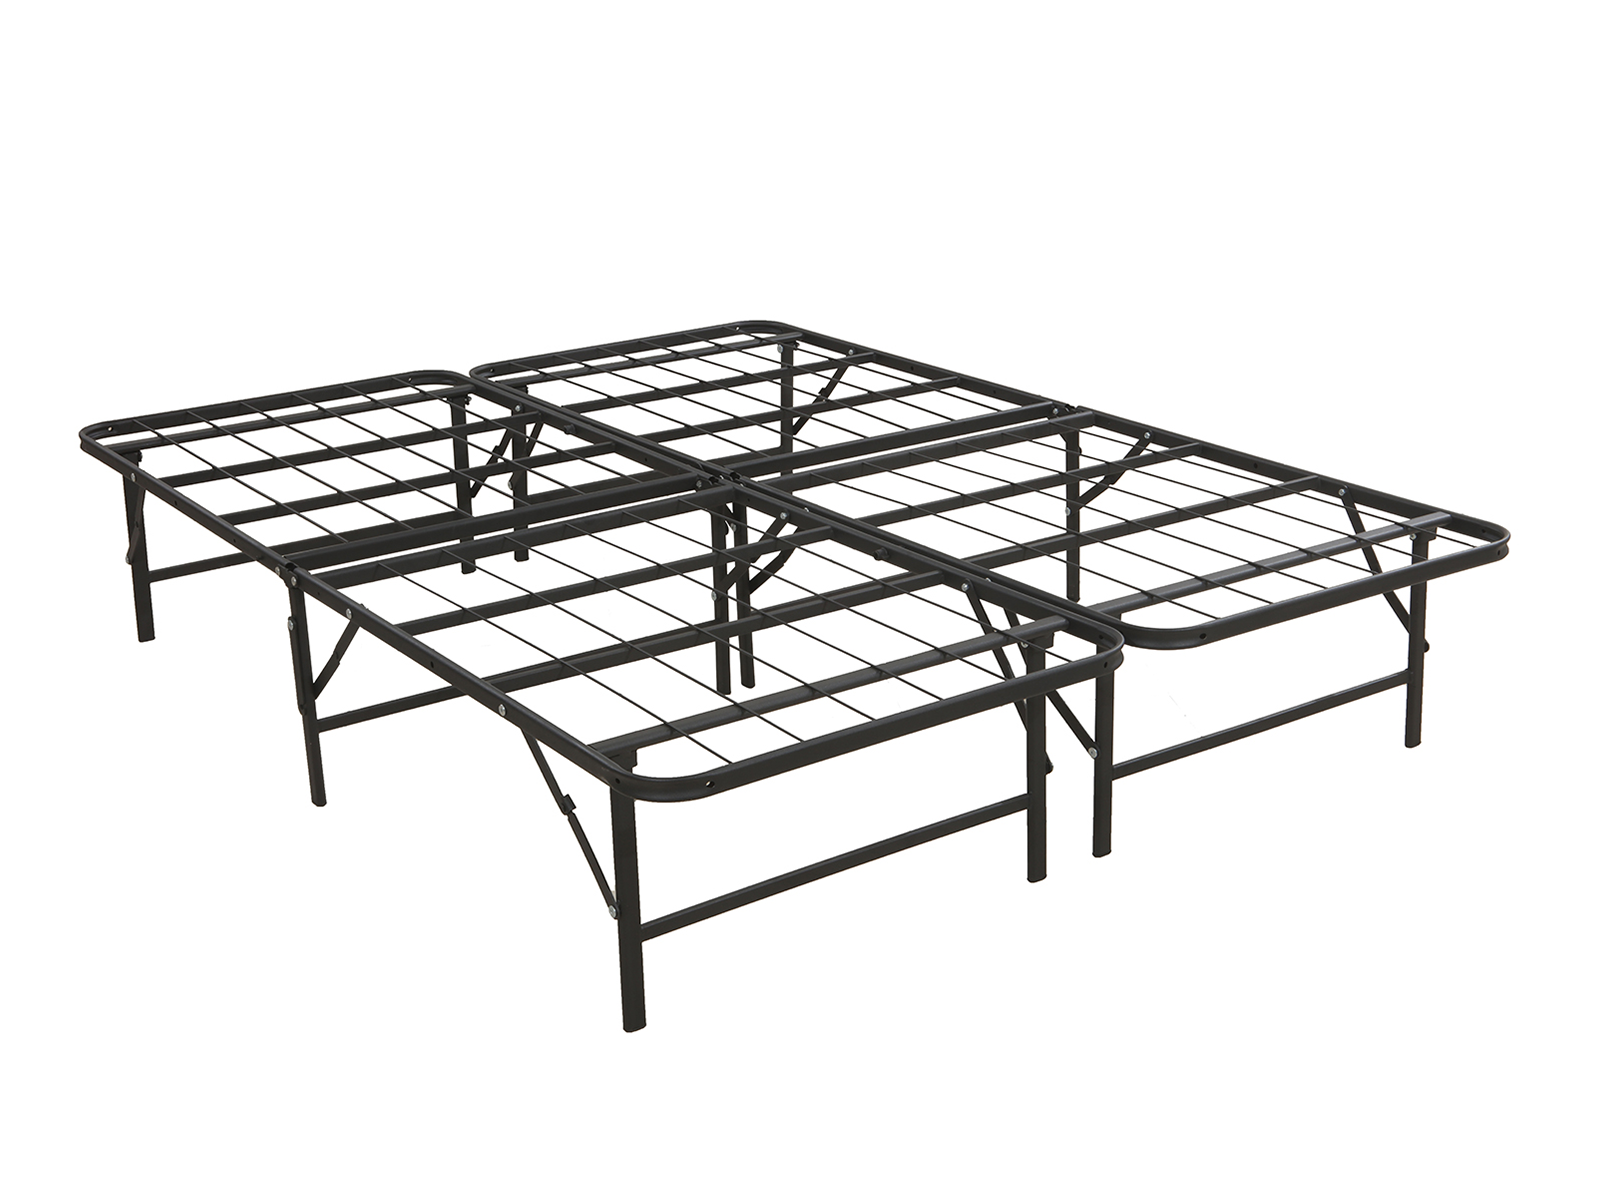 Mattress Firm Platform Bed Frame | King | Deluxe Raised Metal | Easy Assembly